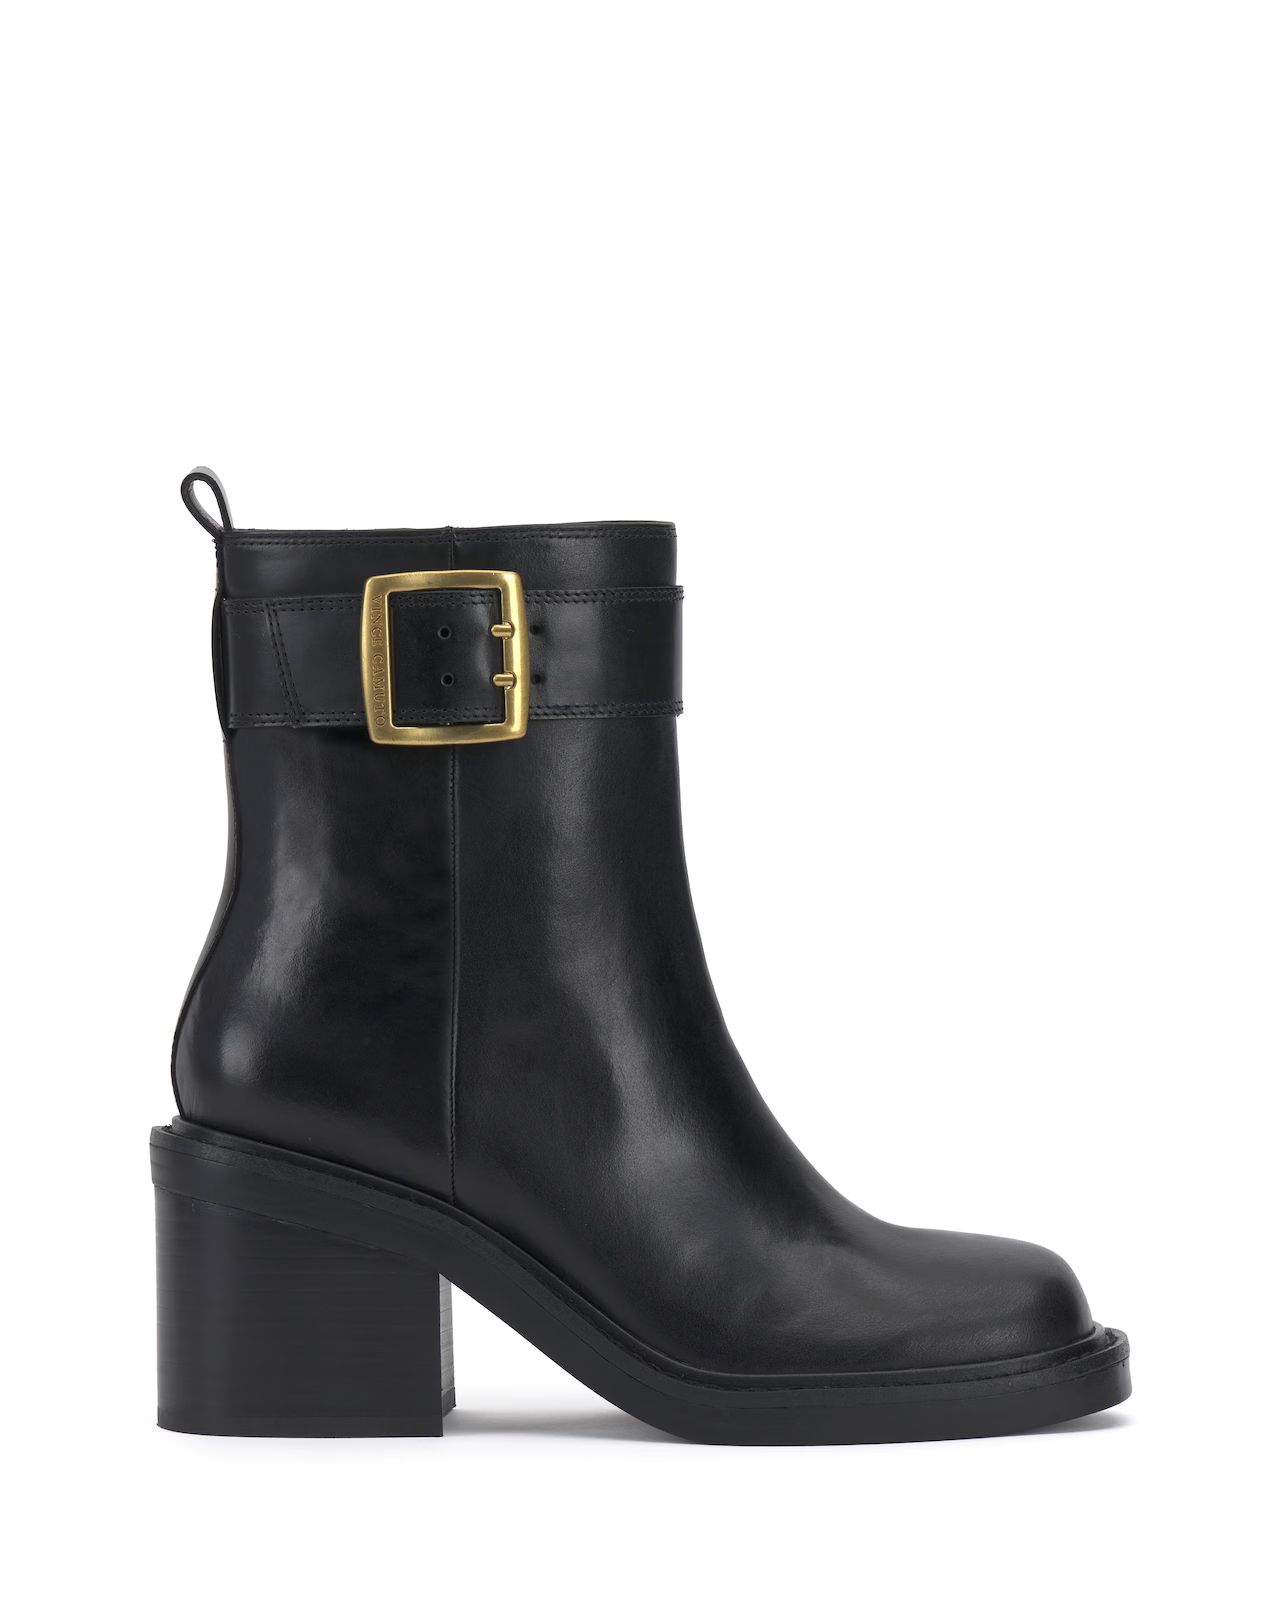 Vince Camuto Bembonie Bootie | Vince Camuto